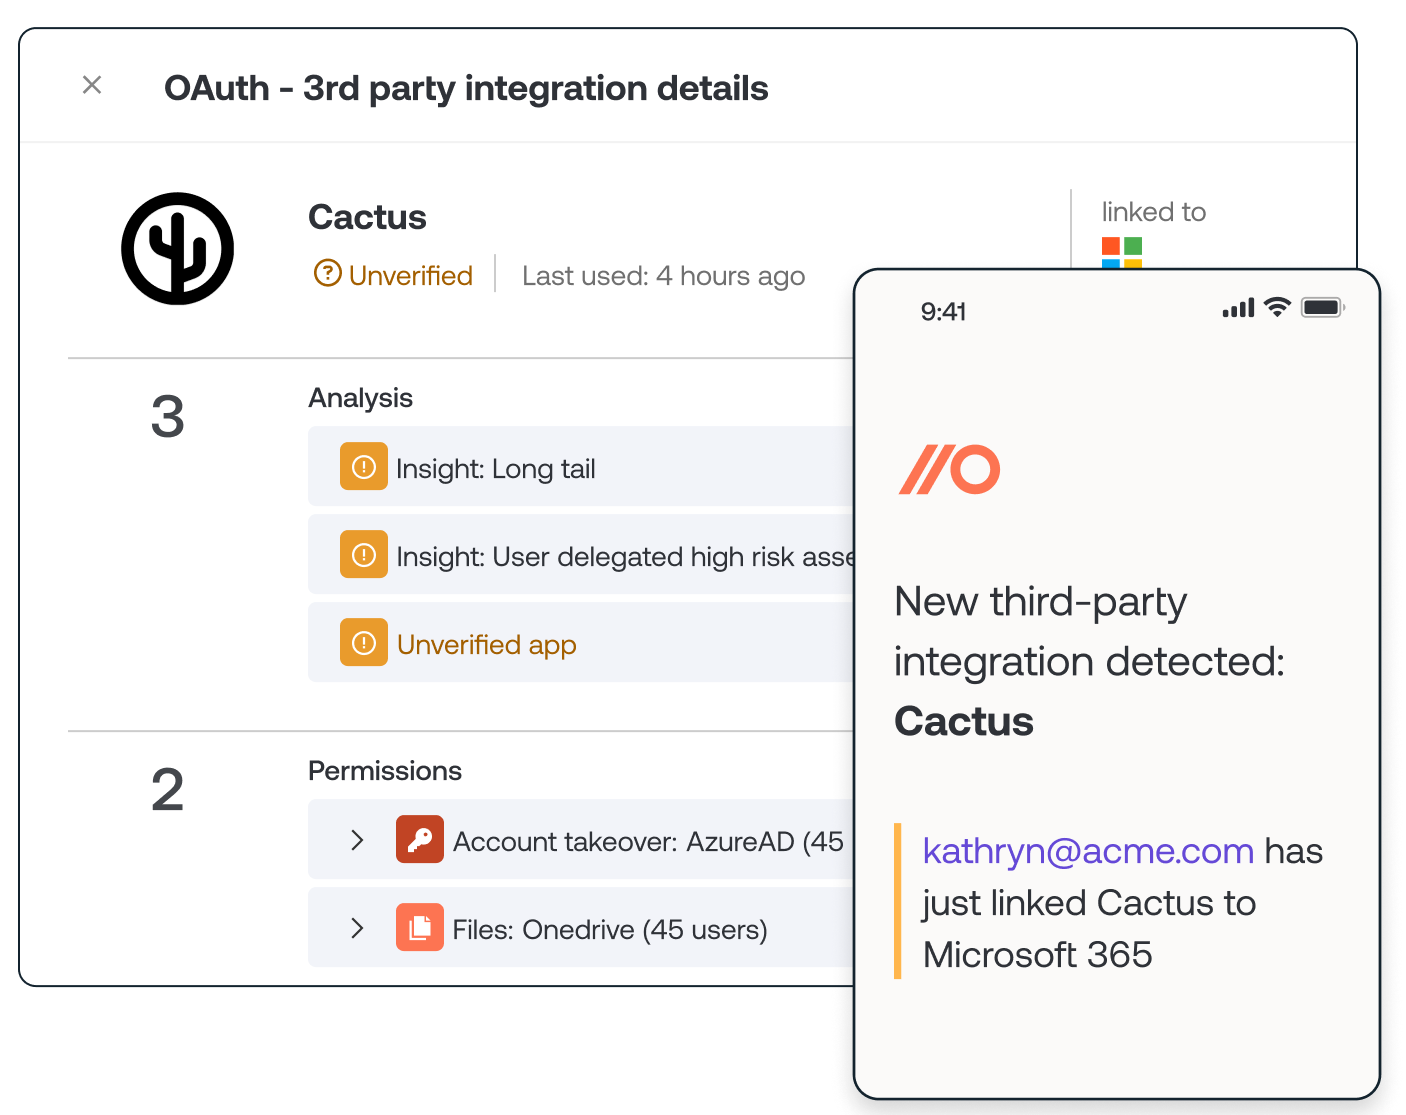 Get alerted immediately to new SaaS and third-party integrations